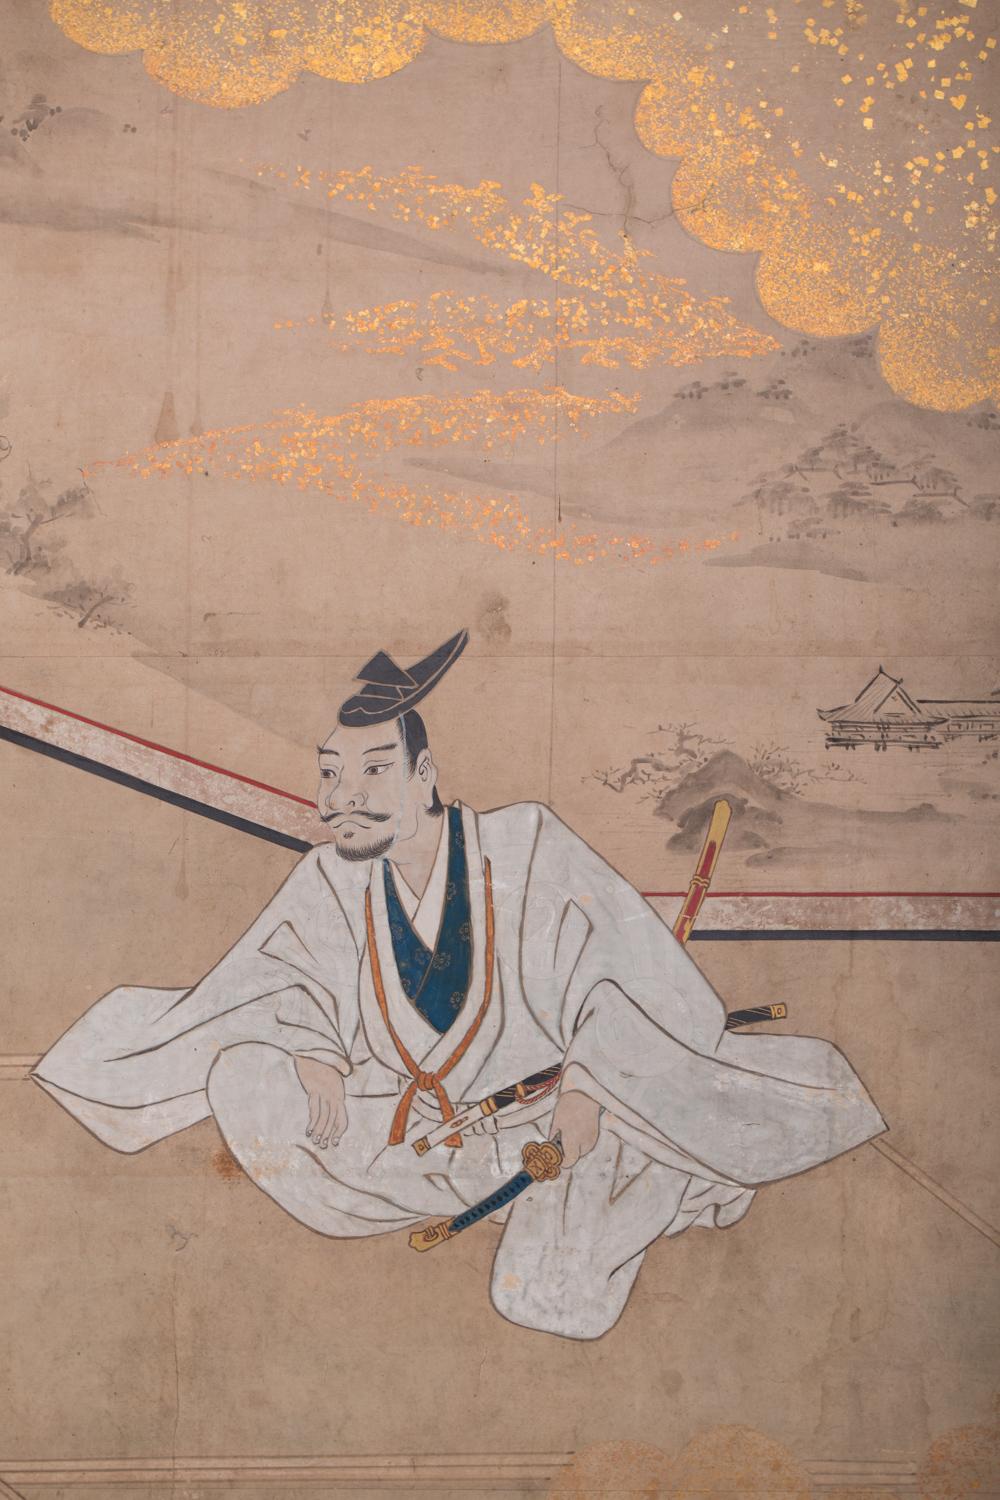 The Genpei War took place from 1180–1185, during which the Minamoto clan rebelled against the Taira clan for control of Japan. The two clans had a bitter rivalry for years, and the Minamoto clan tried to gain control several times before succeeding.